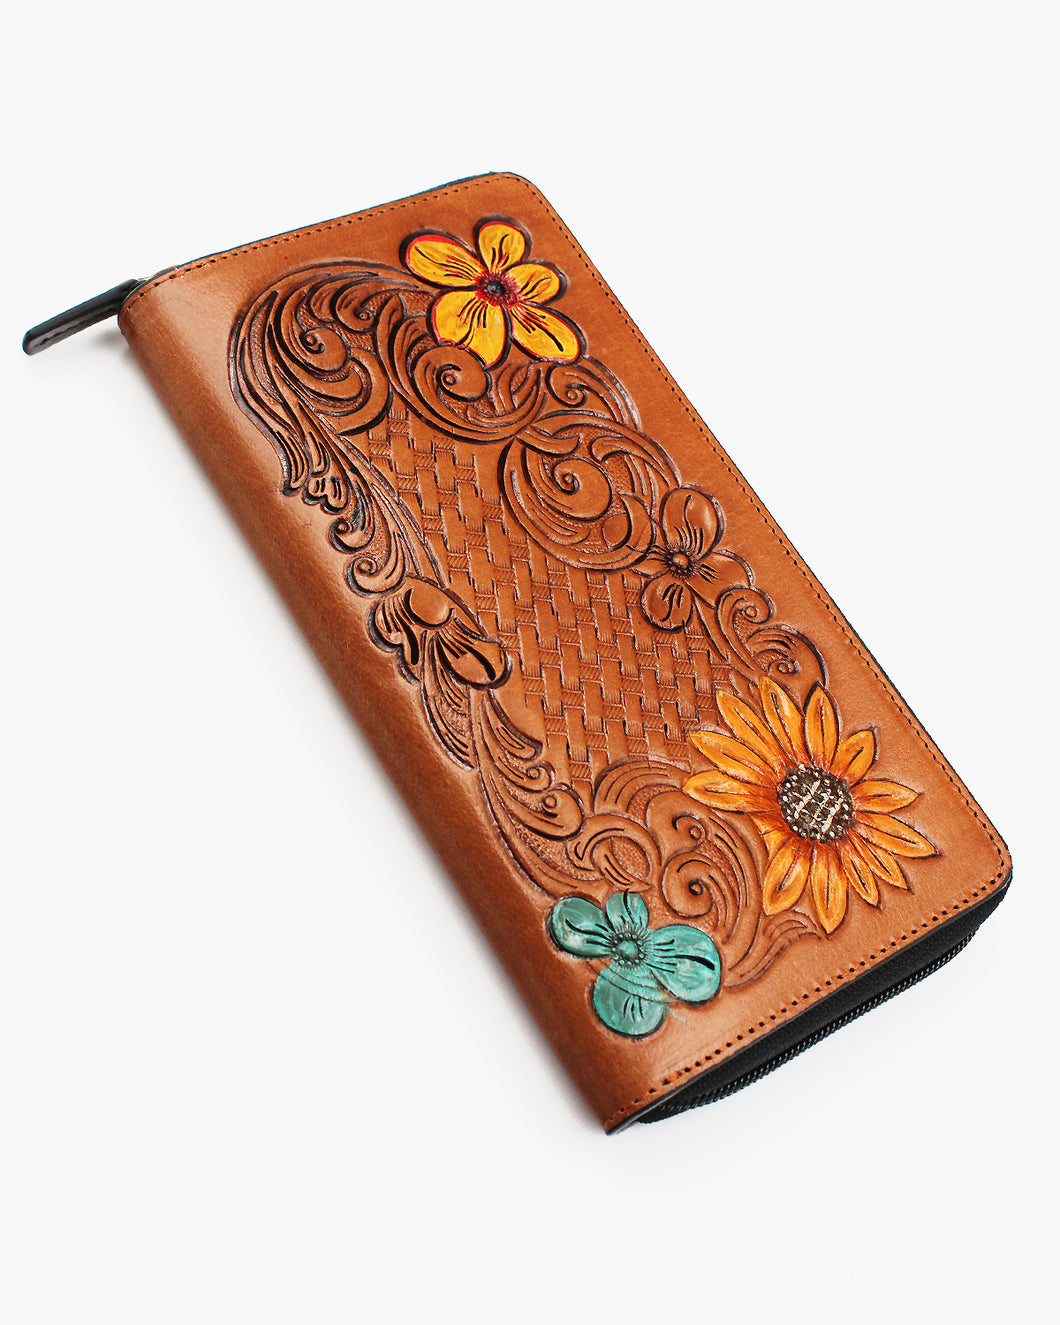 Flower Stamped Leather Wallet